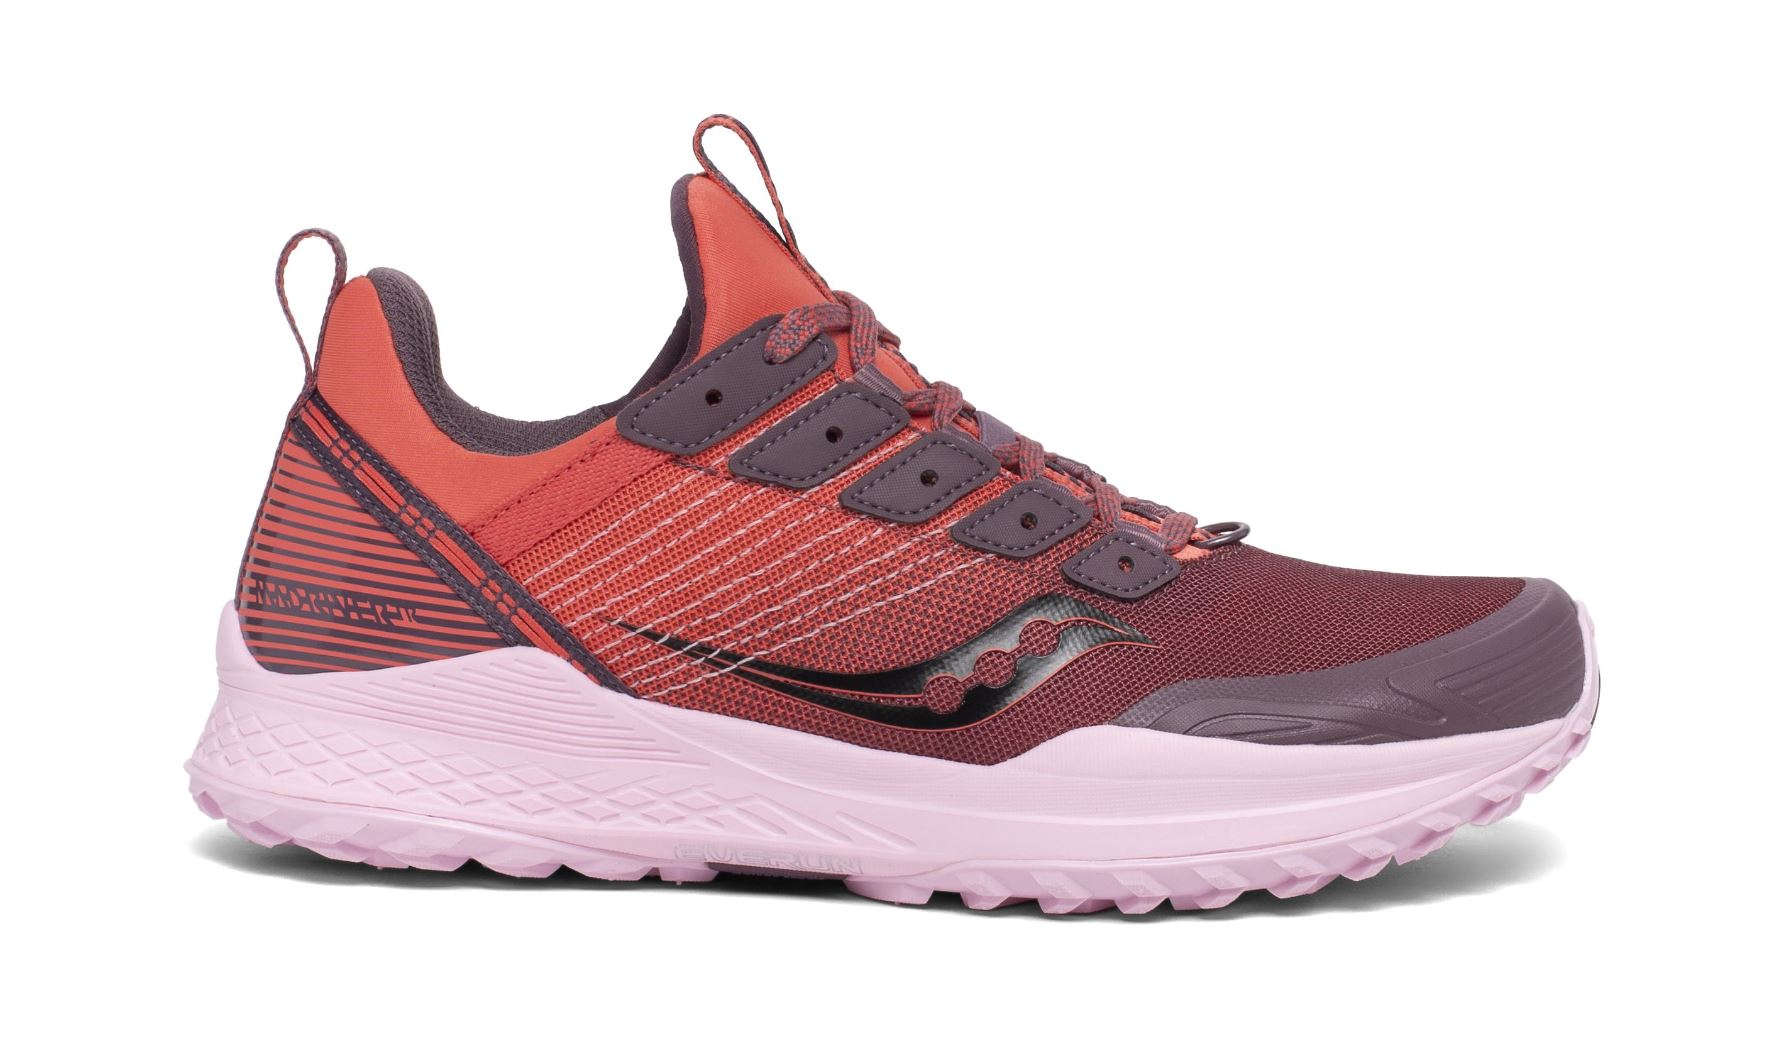 Saucony Canada Black Friday Deals Save 20 OFF Everything + Up to 60